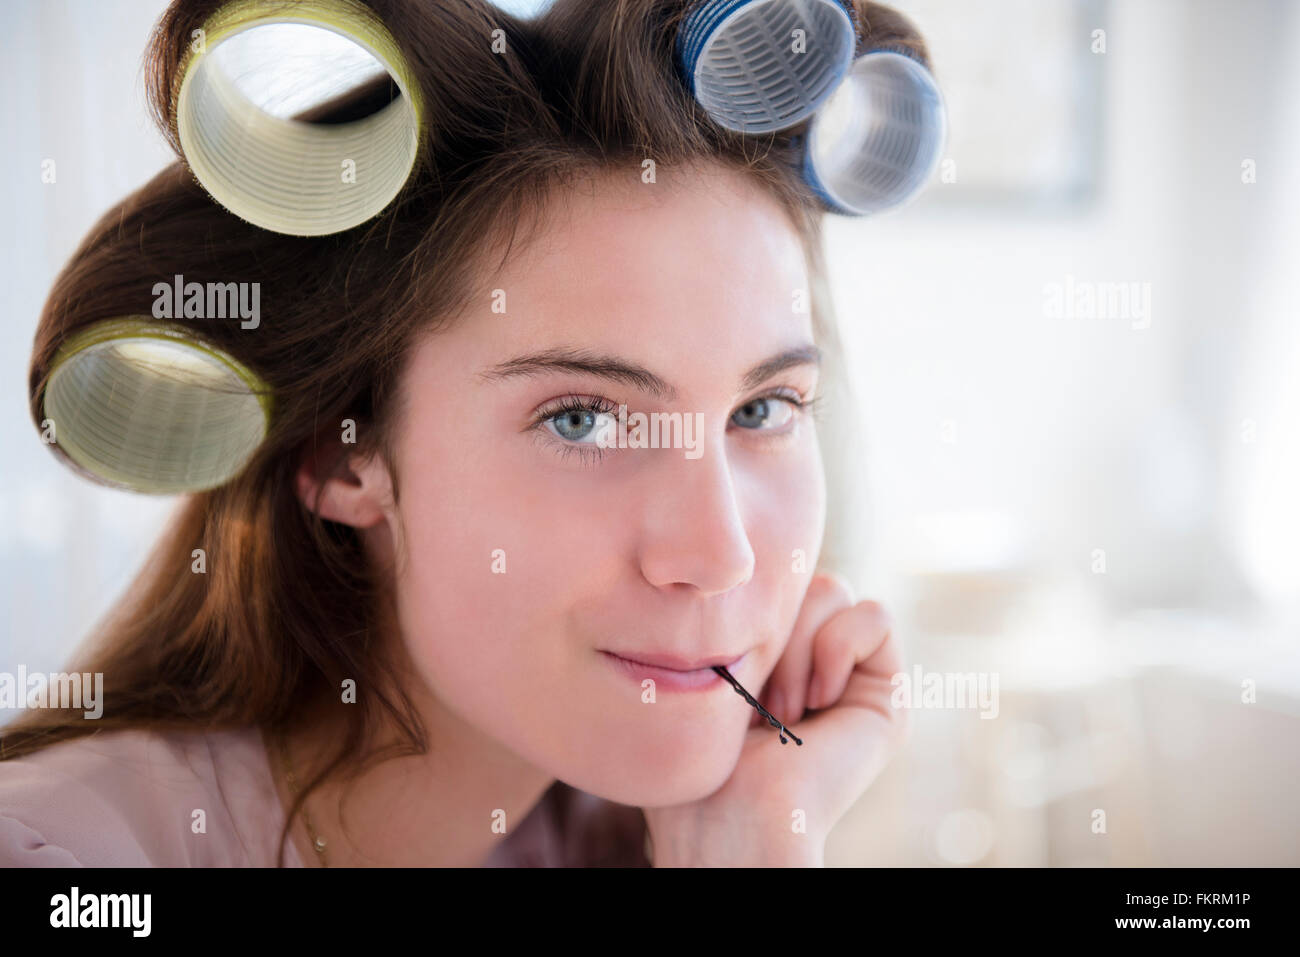 Native American woman with curlers in hair Stock Photo